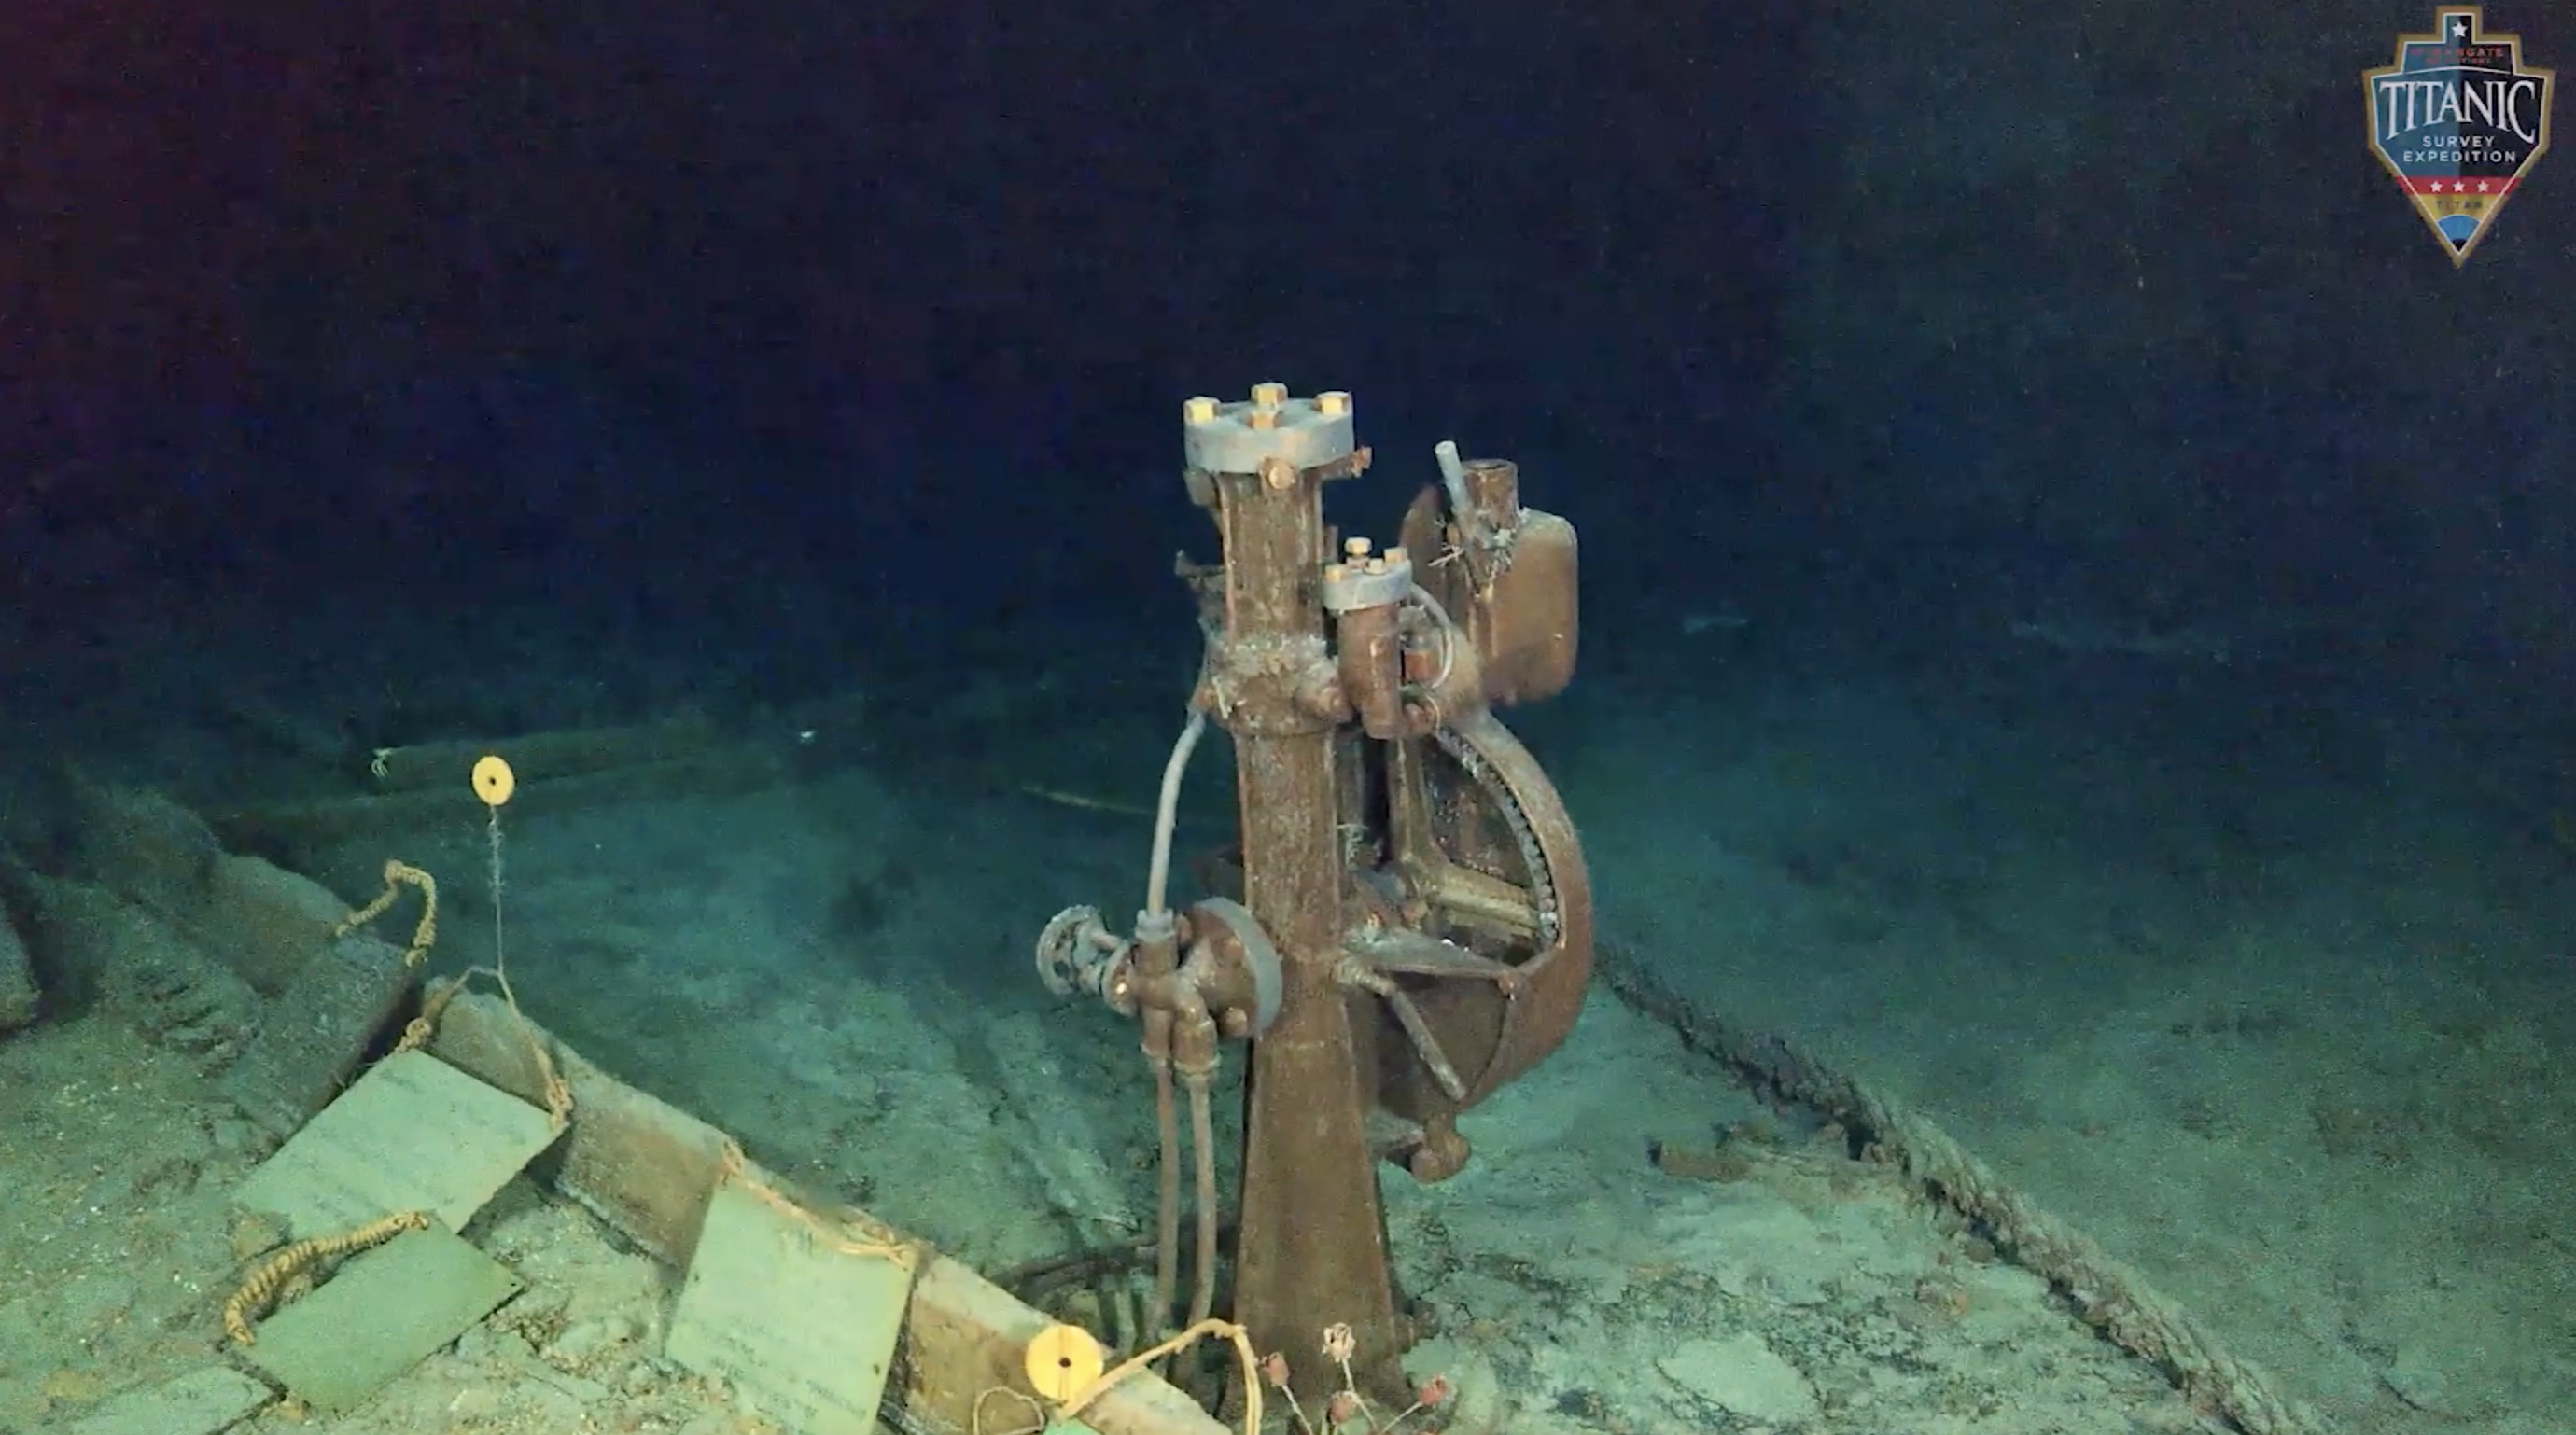 New videos: OceanGate sub dives to Titanic again, reports ship wreckage is ‘rapidly deteriorating’